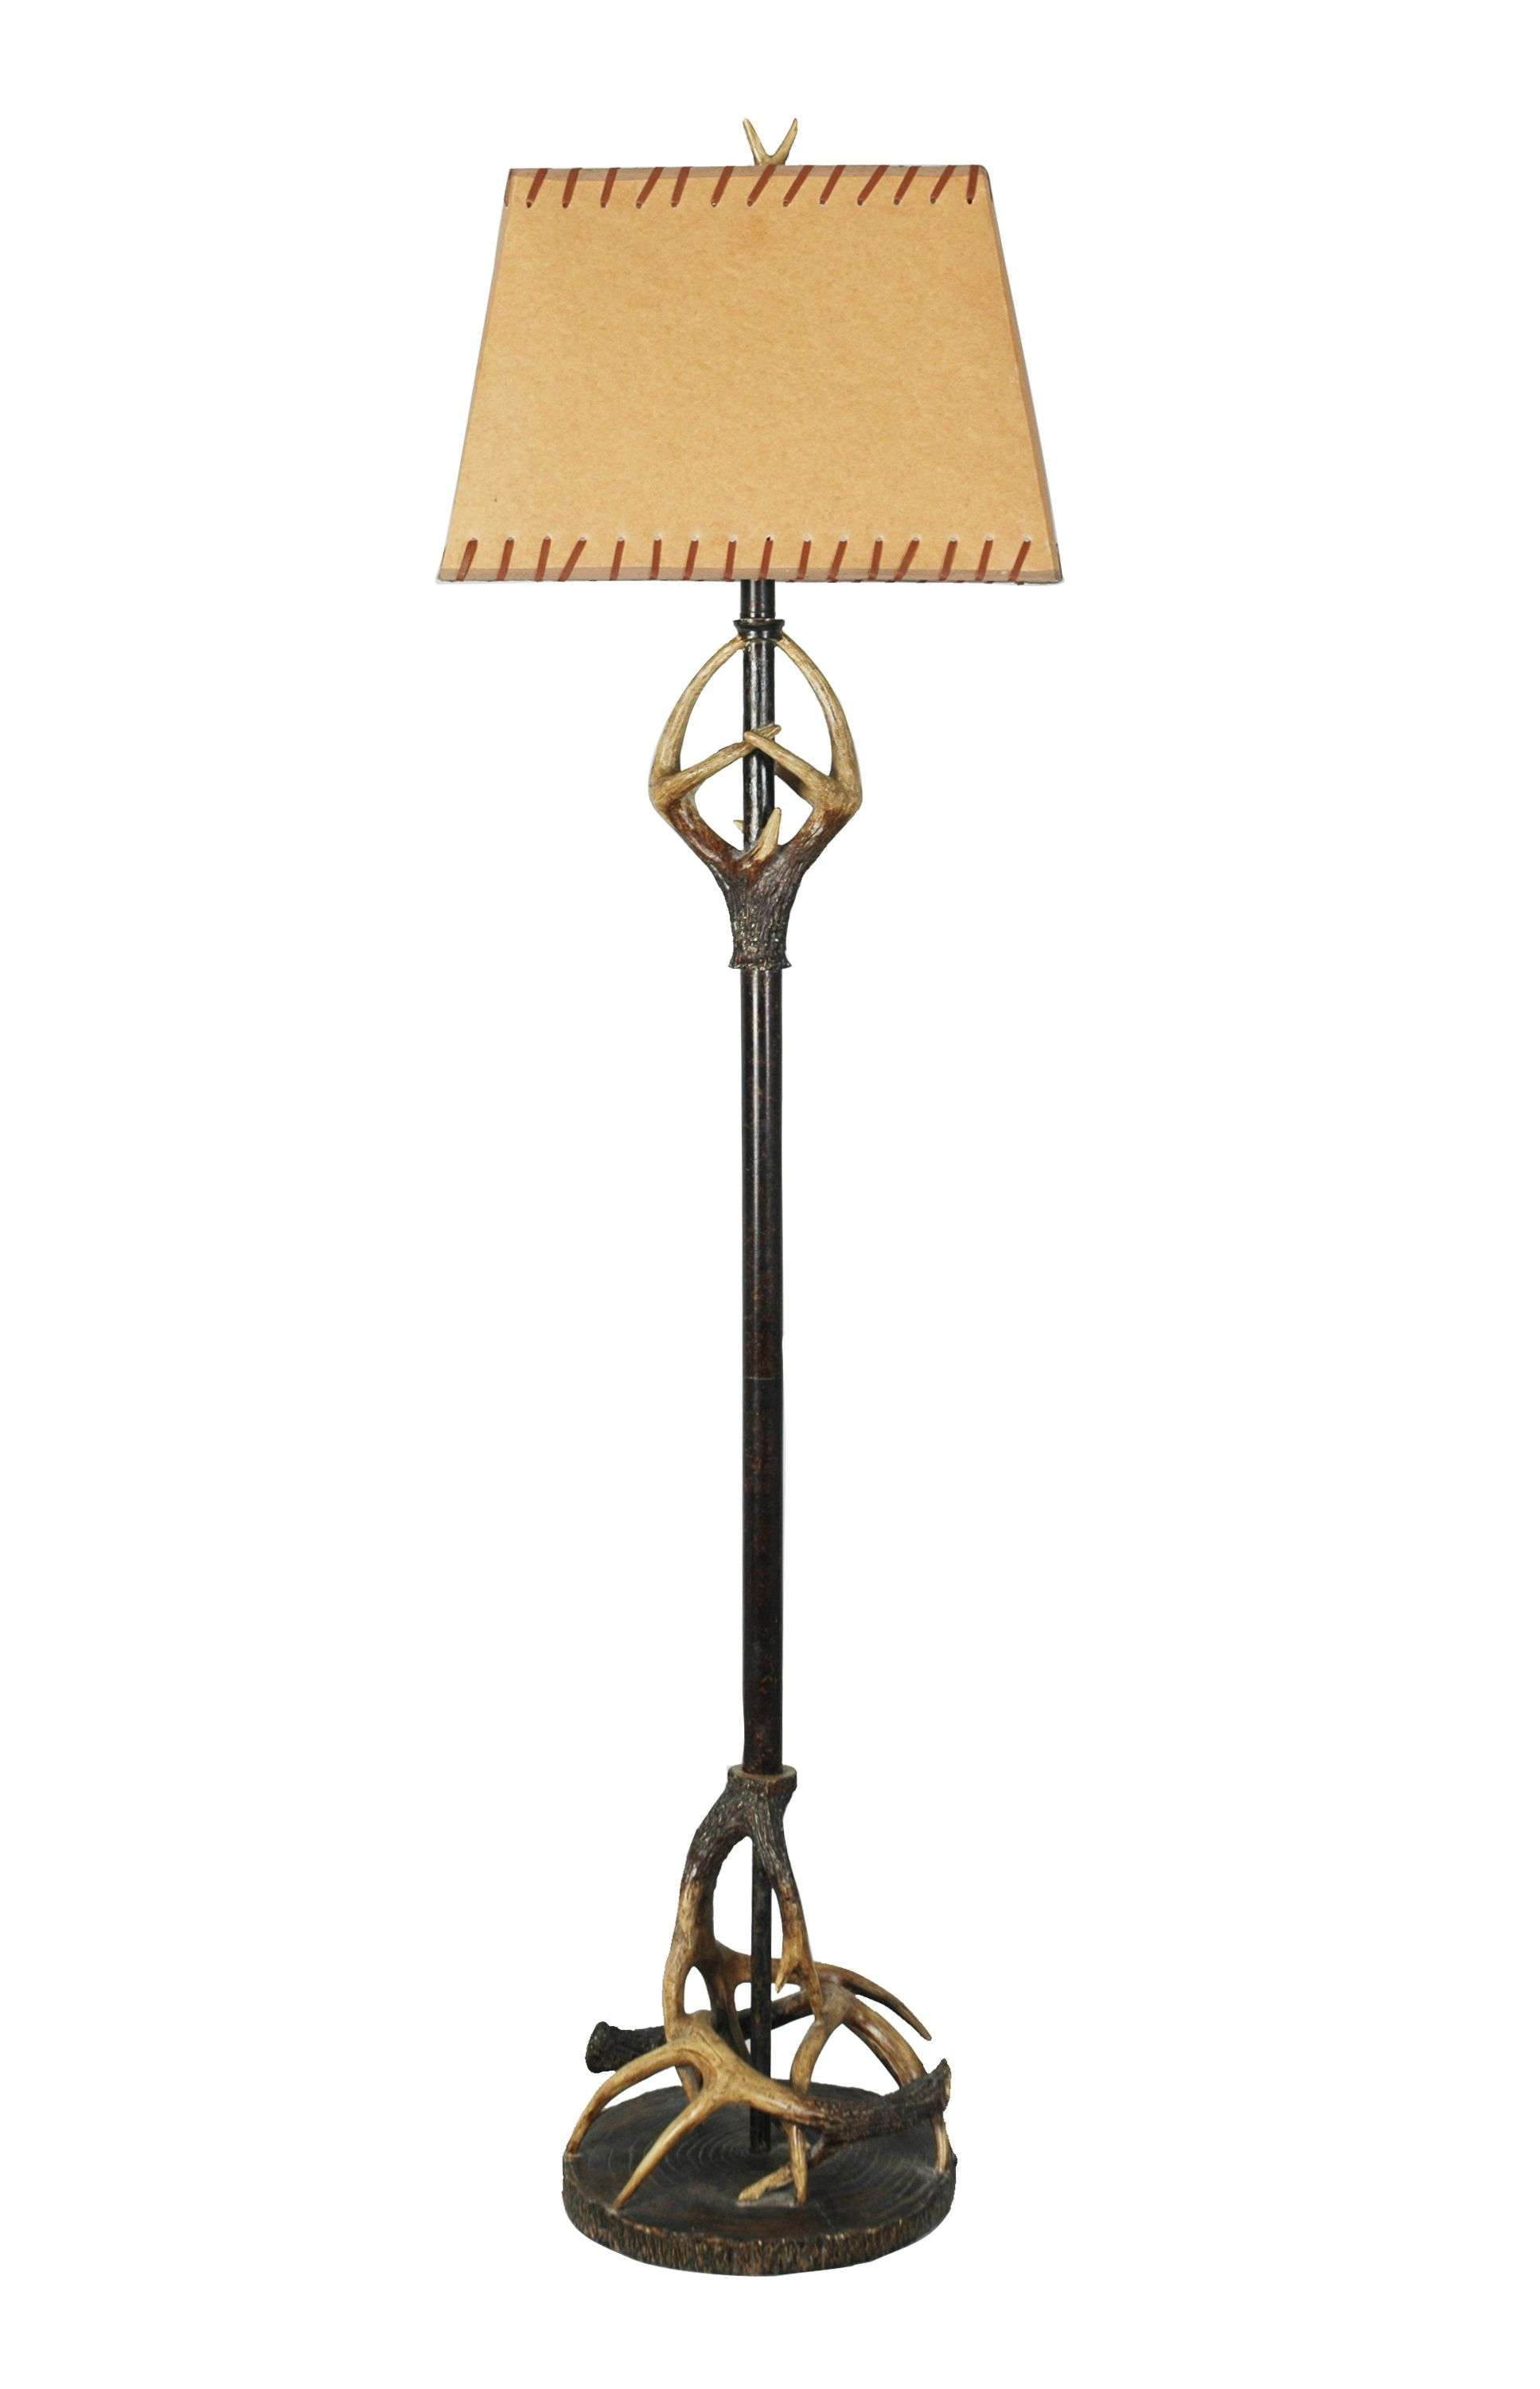 Polyresin Antler Floor Lamp Lps 091 Lodge Novelty Floor pertaining to size 1935 X 3001